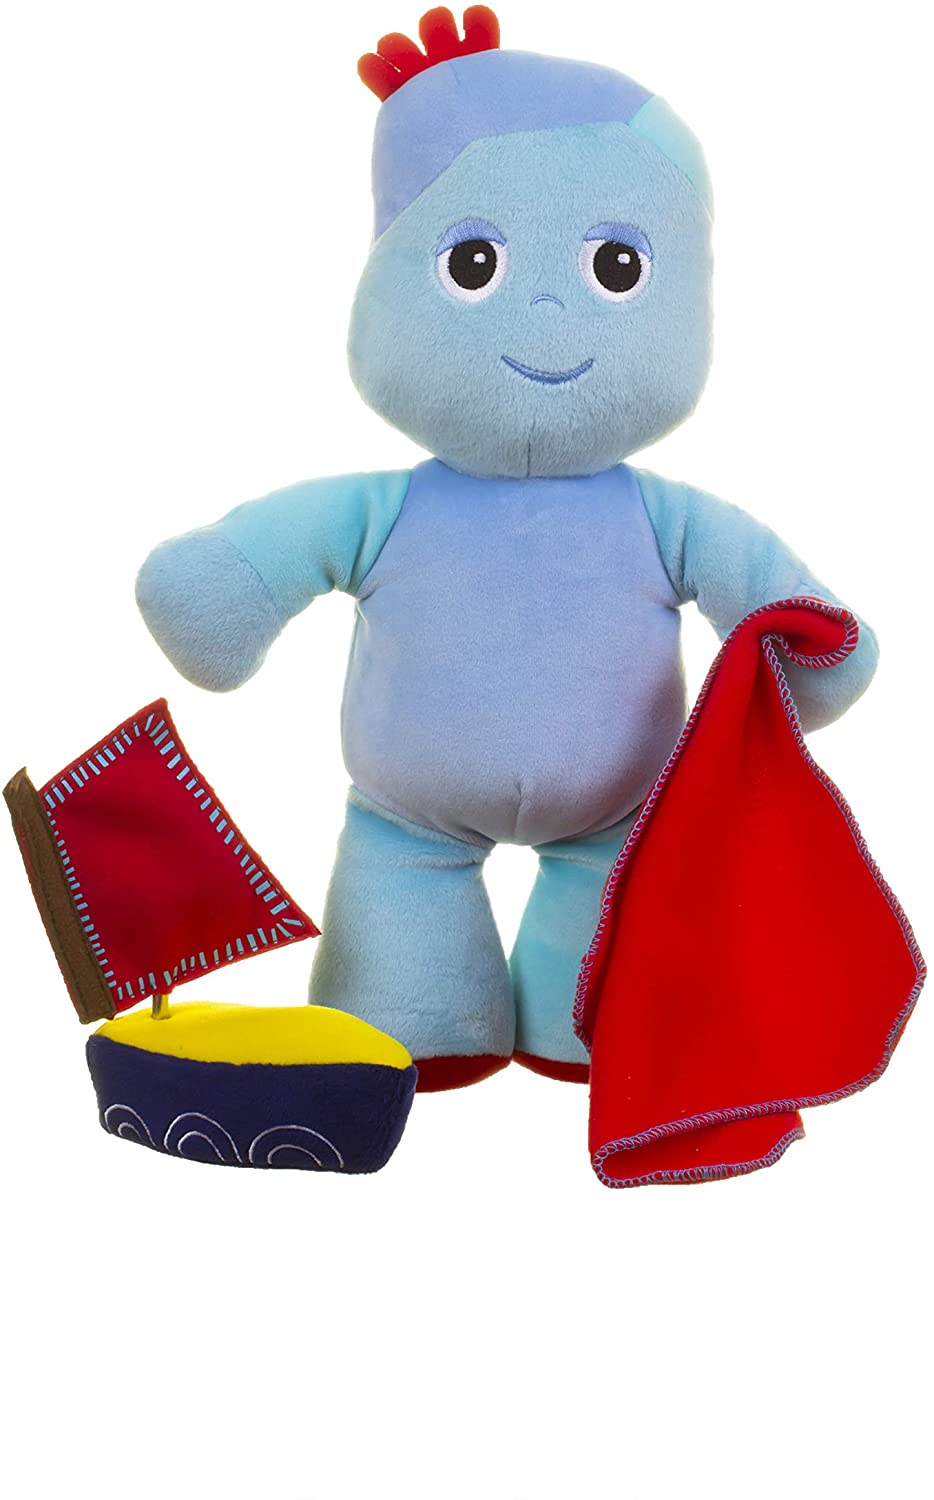 In the Night Garden Iggle Piggle Wind-Up Musical Boat Sleep Aid and Soft Toy